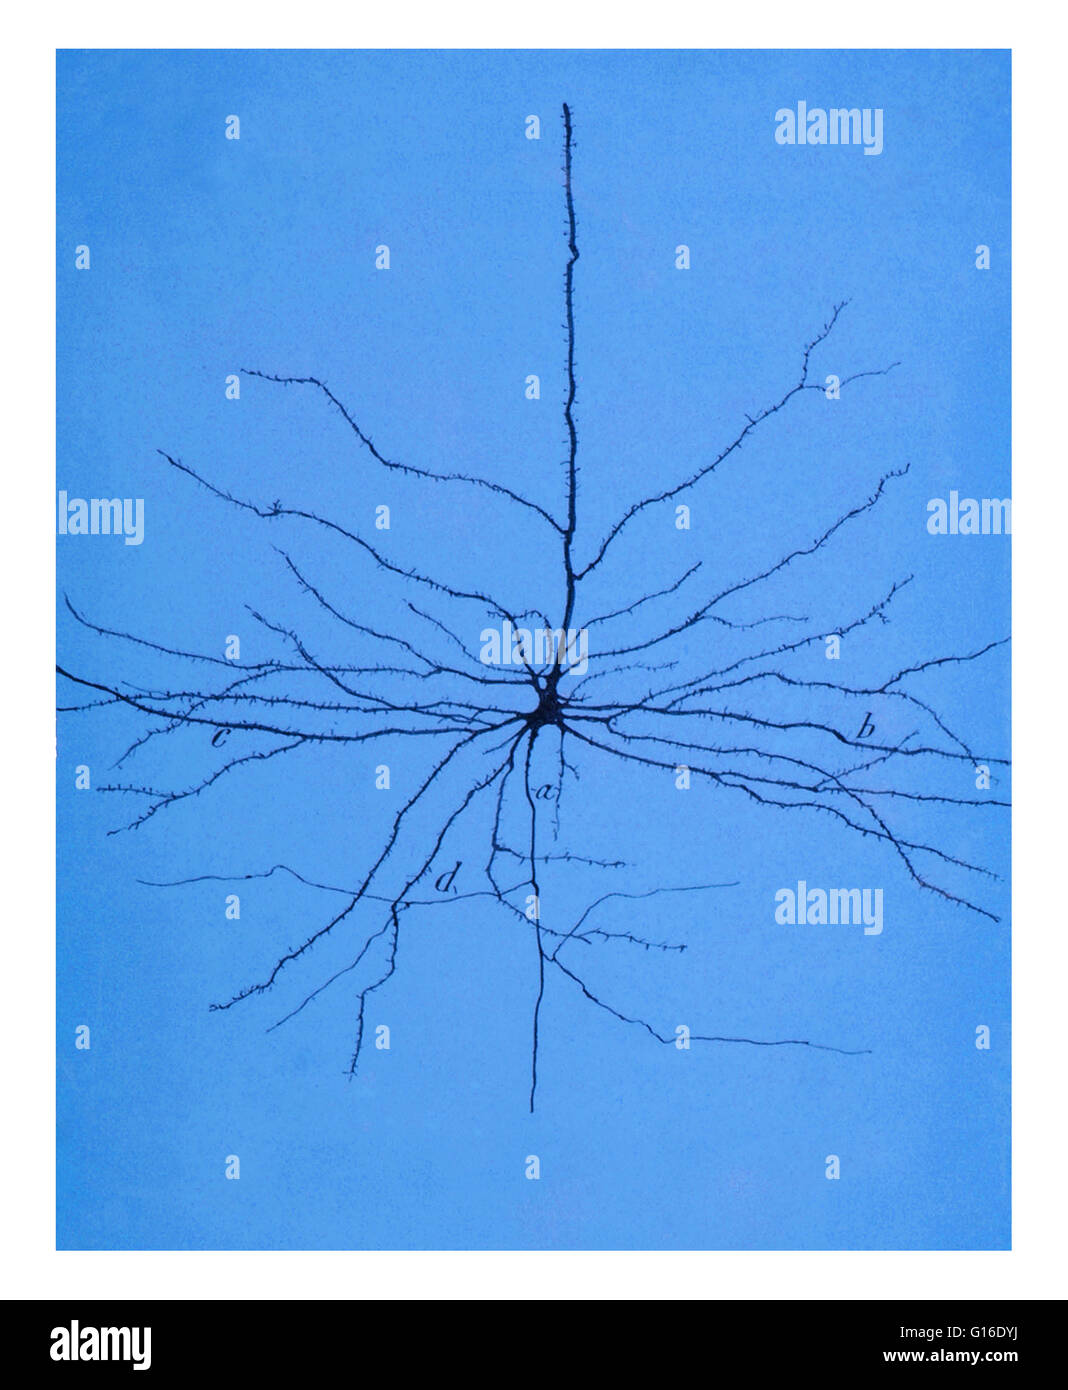 Drawing of a pyramidal cell in the cerebral motor cortex by Santiago Ramon y Cajal (1852-1934). Pyramidal neurons (pyramidal cells) are a type of neuron found in areas of the brain including the cerebral cortex, the hippocampus, and the amygdala. Pyramida Stock Photo